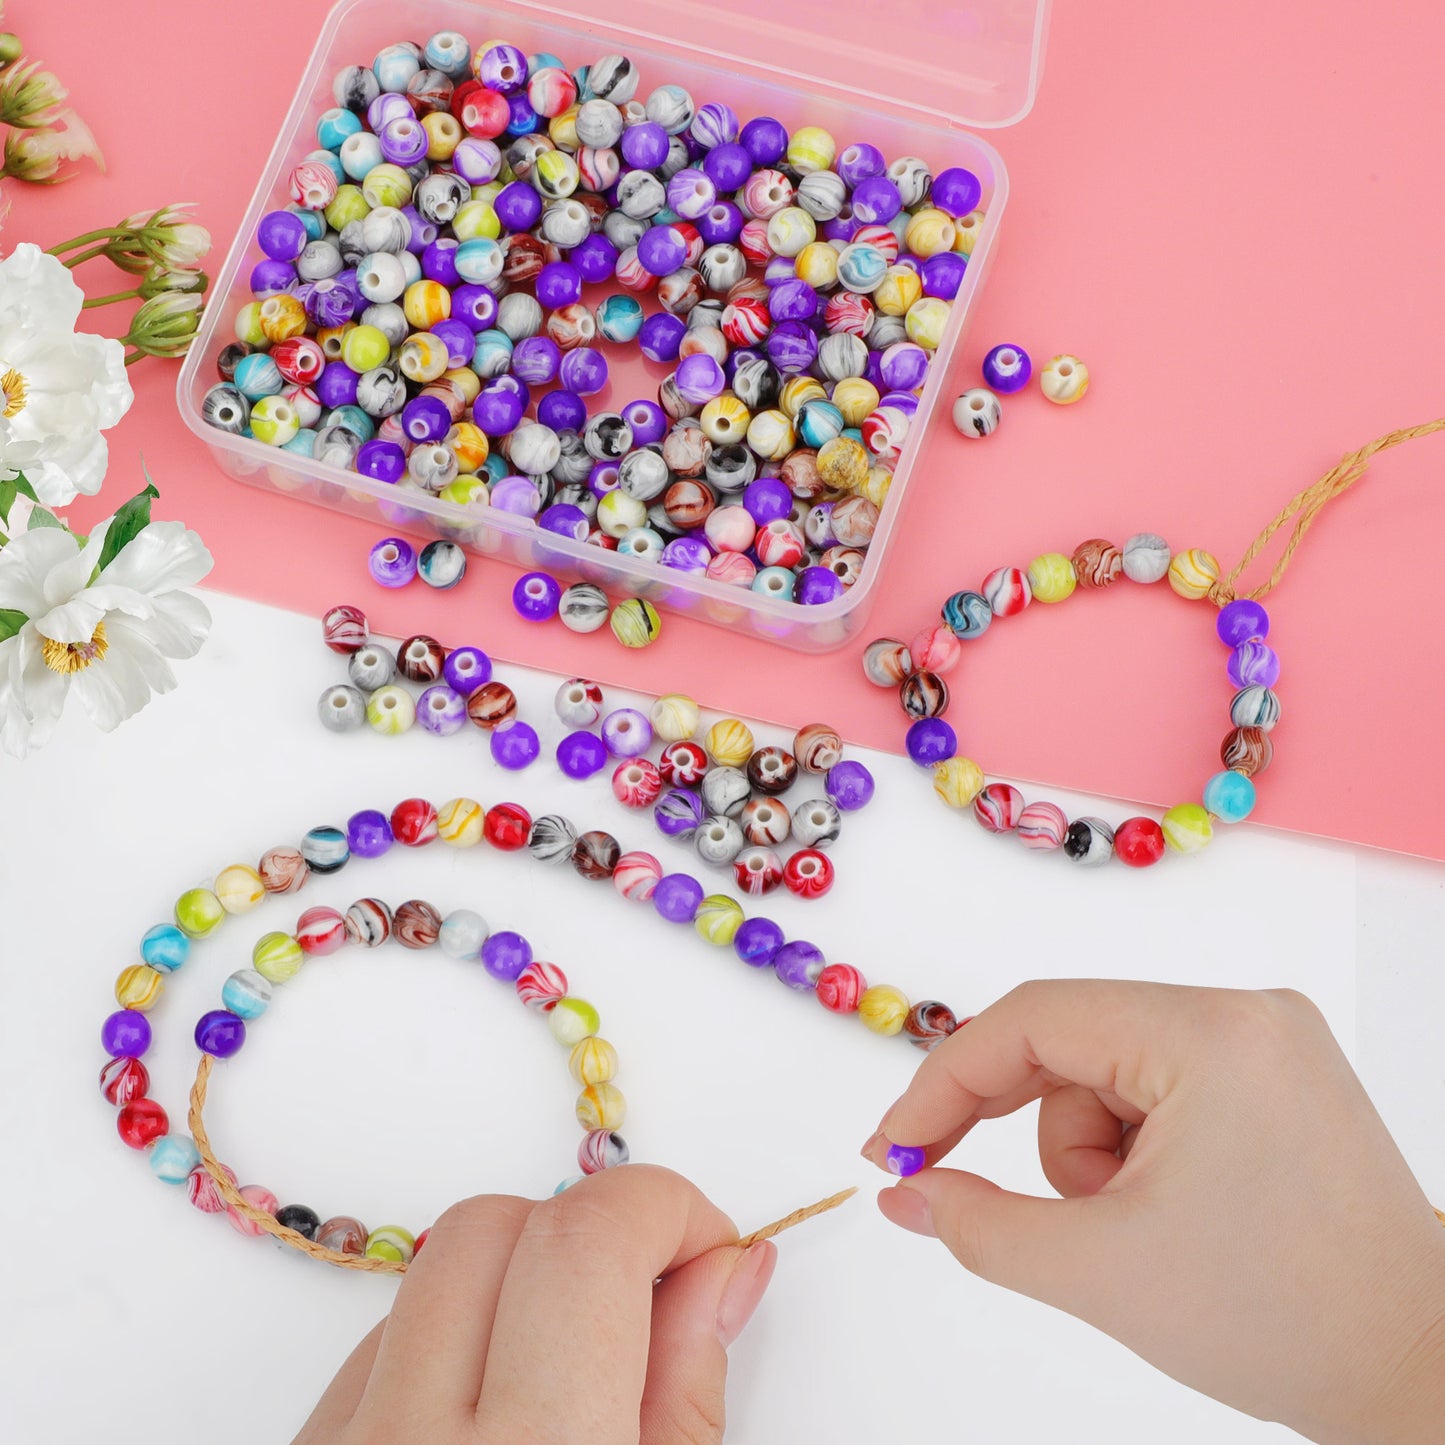 500 Pcs 8mm ink pattern acrylic round beads - Multicolor Acrylic Round Loose Beads with Storage Box for Bracelet Necklace Jewelry Making